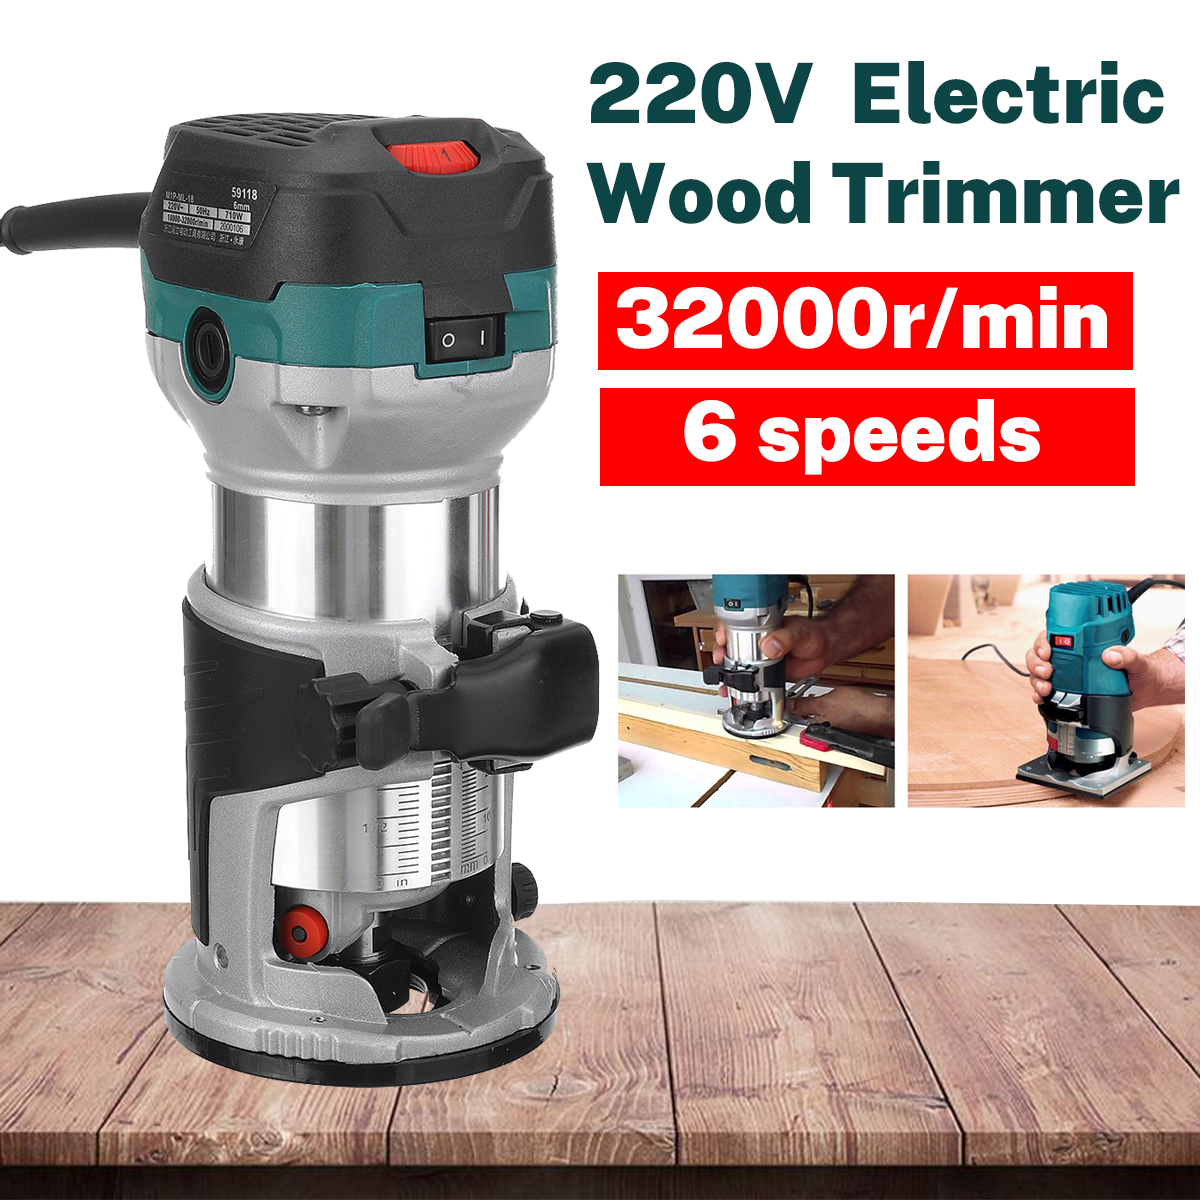 220V-710W-Electric-Wood-Trimmer-6-Speed-Wood-Chamfering-Grooving-Curve-Cutting-Woodworking-Planing-1875949-1